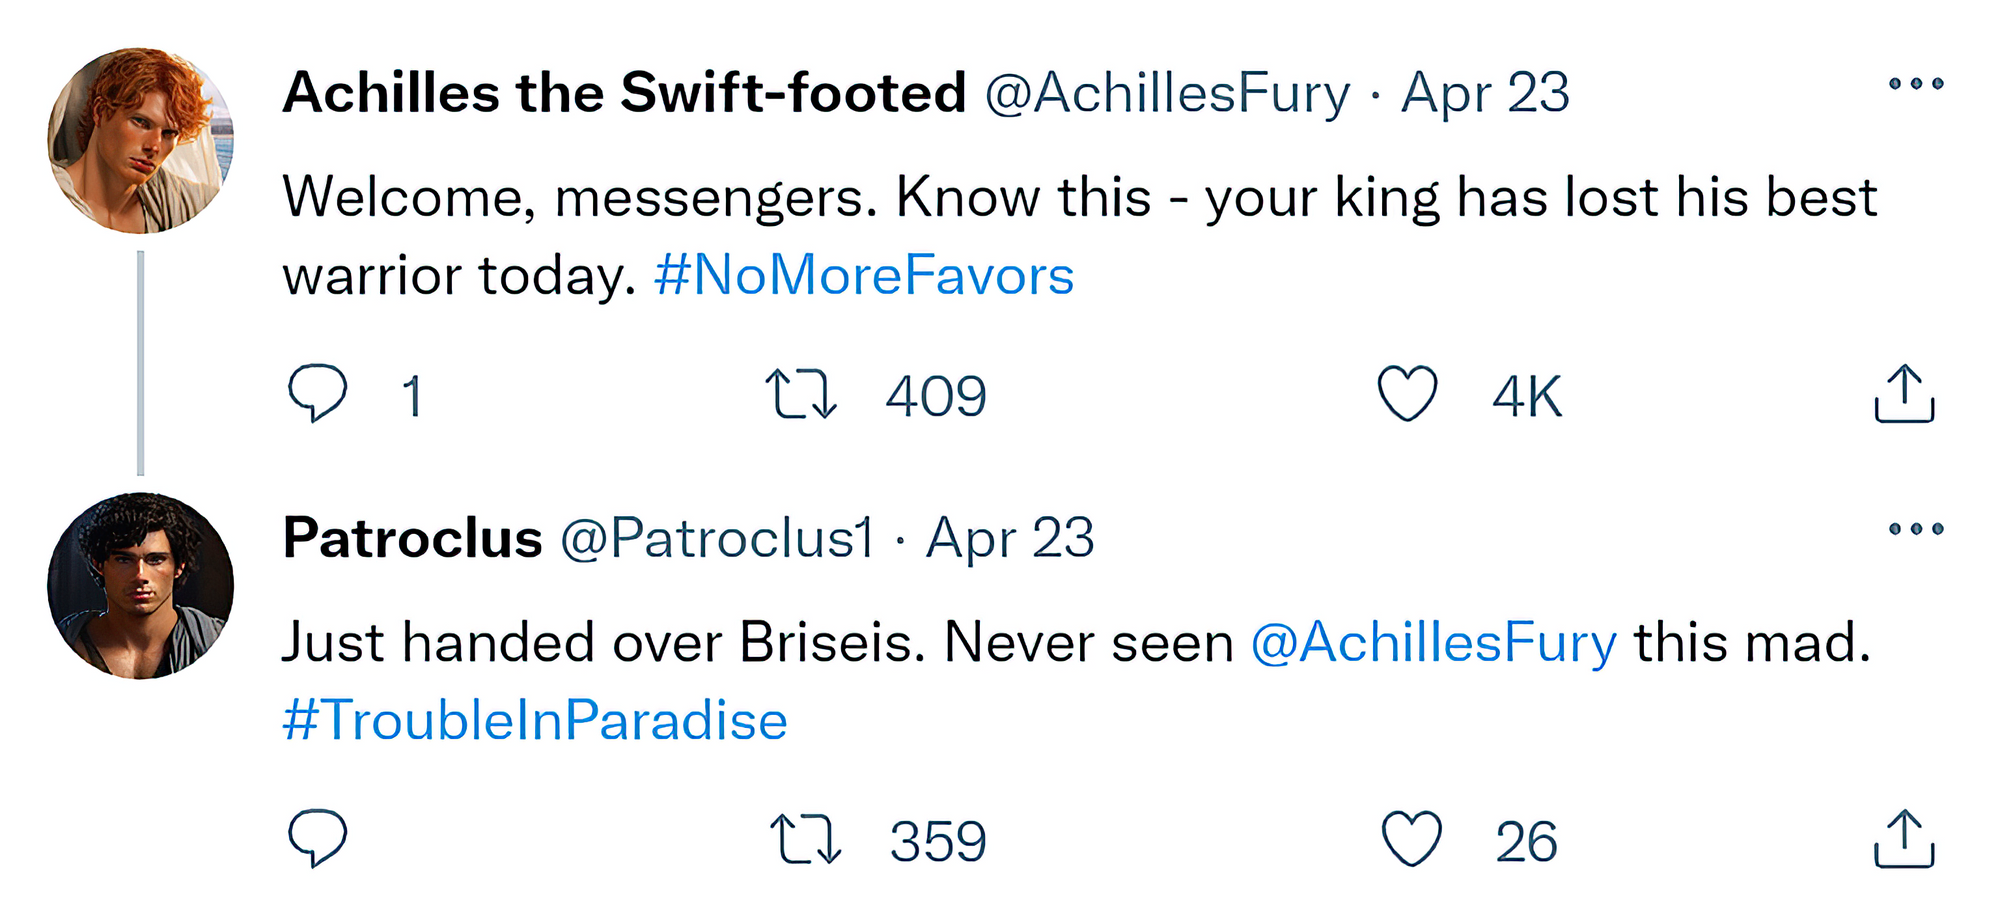 [Reply Chain]  @AchillesFury: "Welcome, messengers. Know this - your king has lost his best warrior today. #NoMoreFavors"  @Patroclus1: "Just handed over Briseis. Never seen @AchillesFury this mad. #TroubleInParadise"